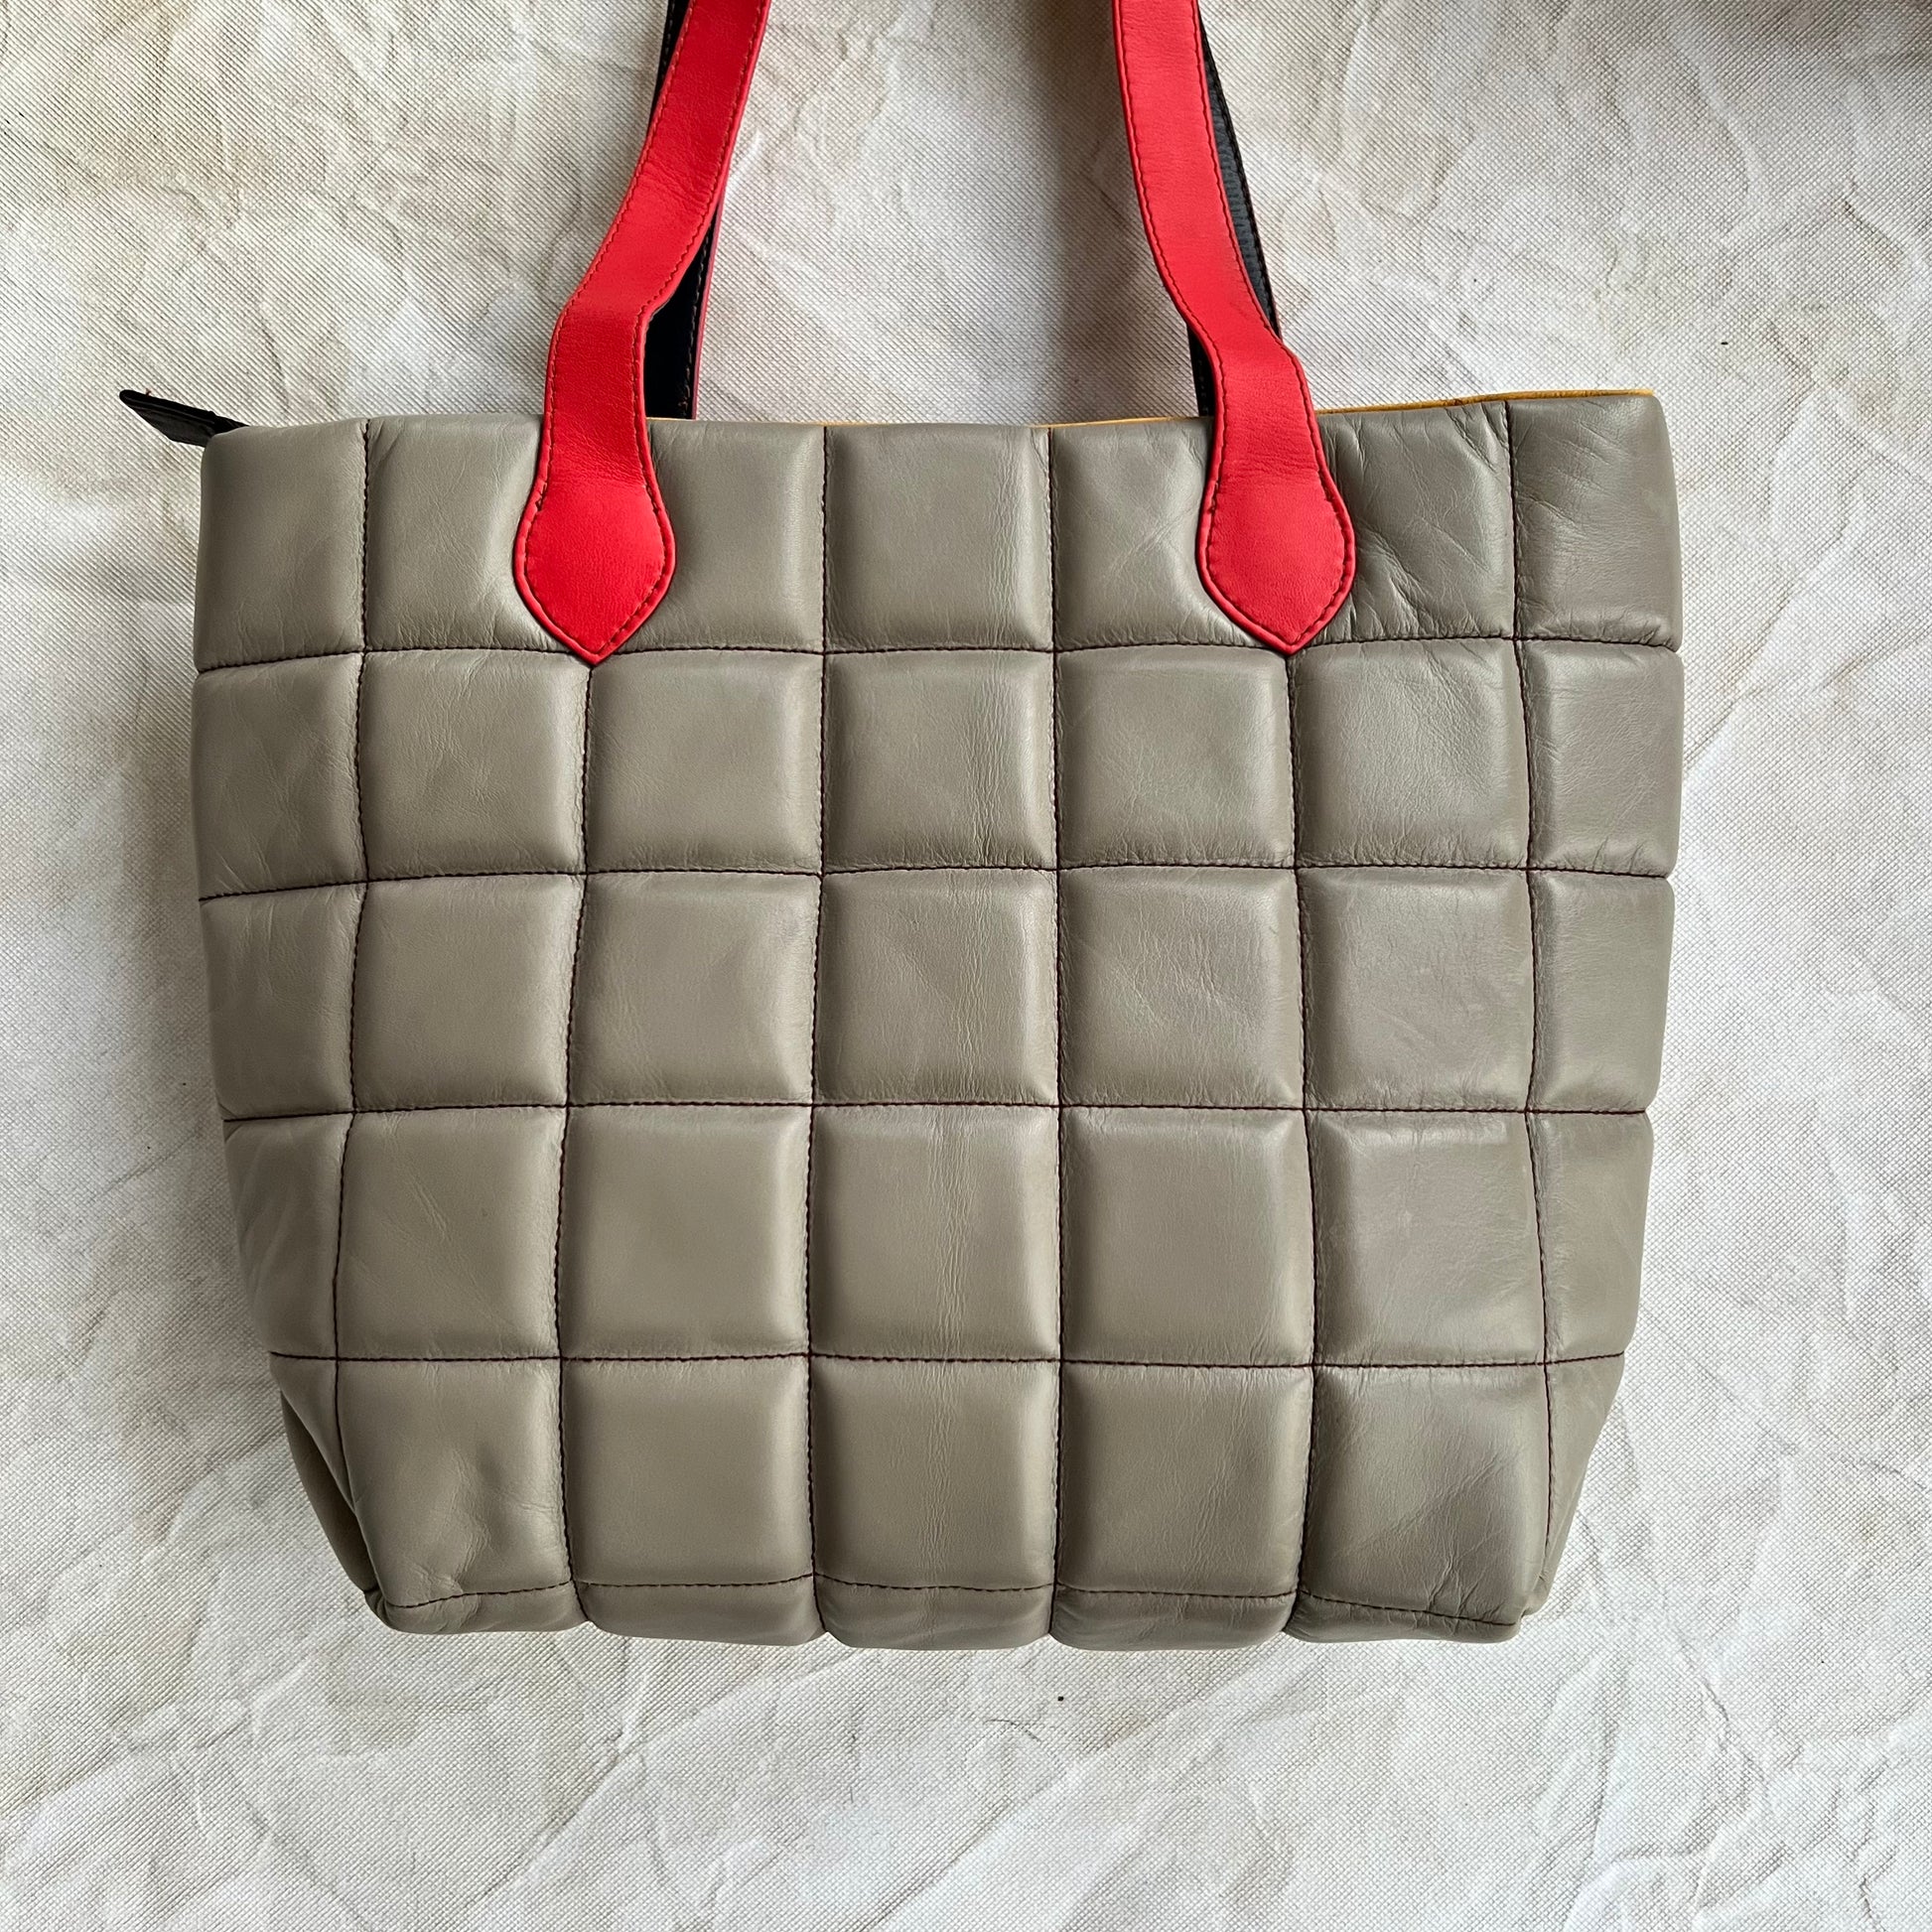 back view of taupe tote with red handles.